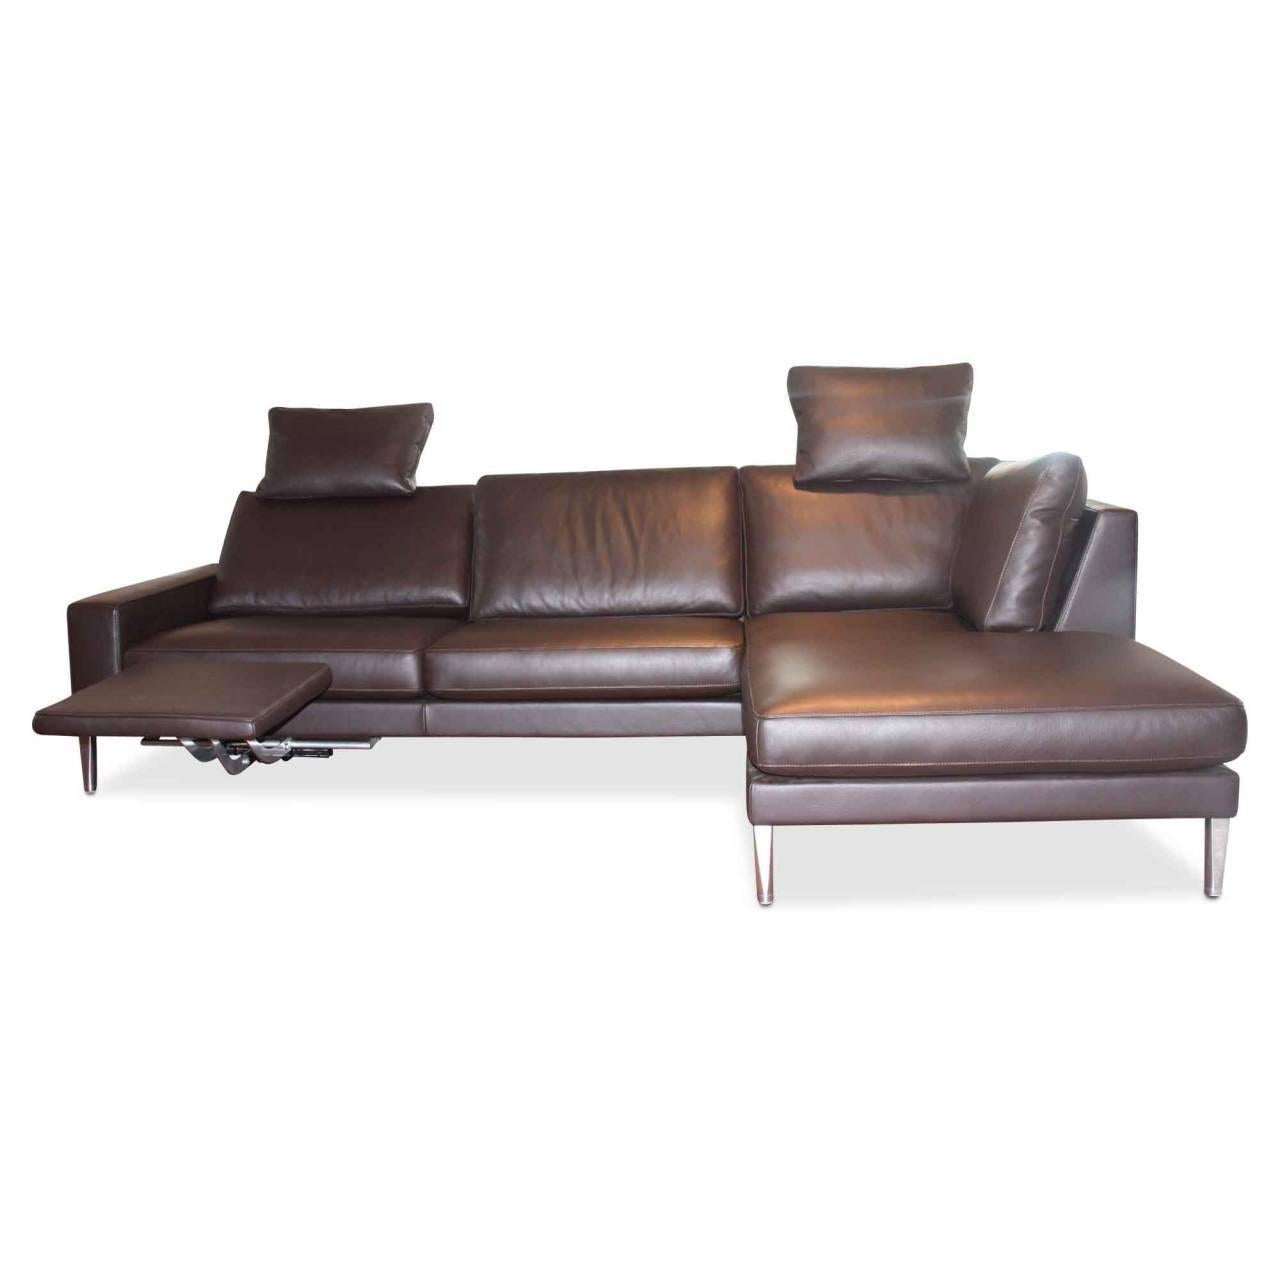 We are delighted to present to you the stunning L-formed sofa 